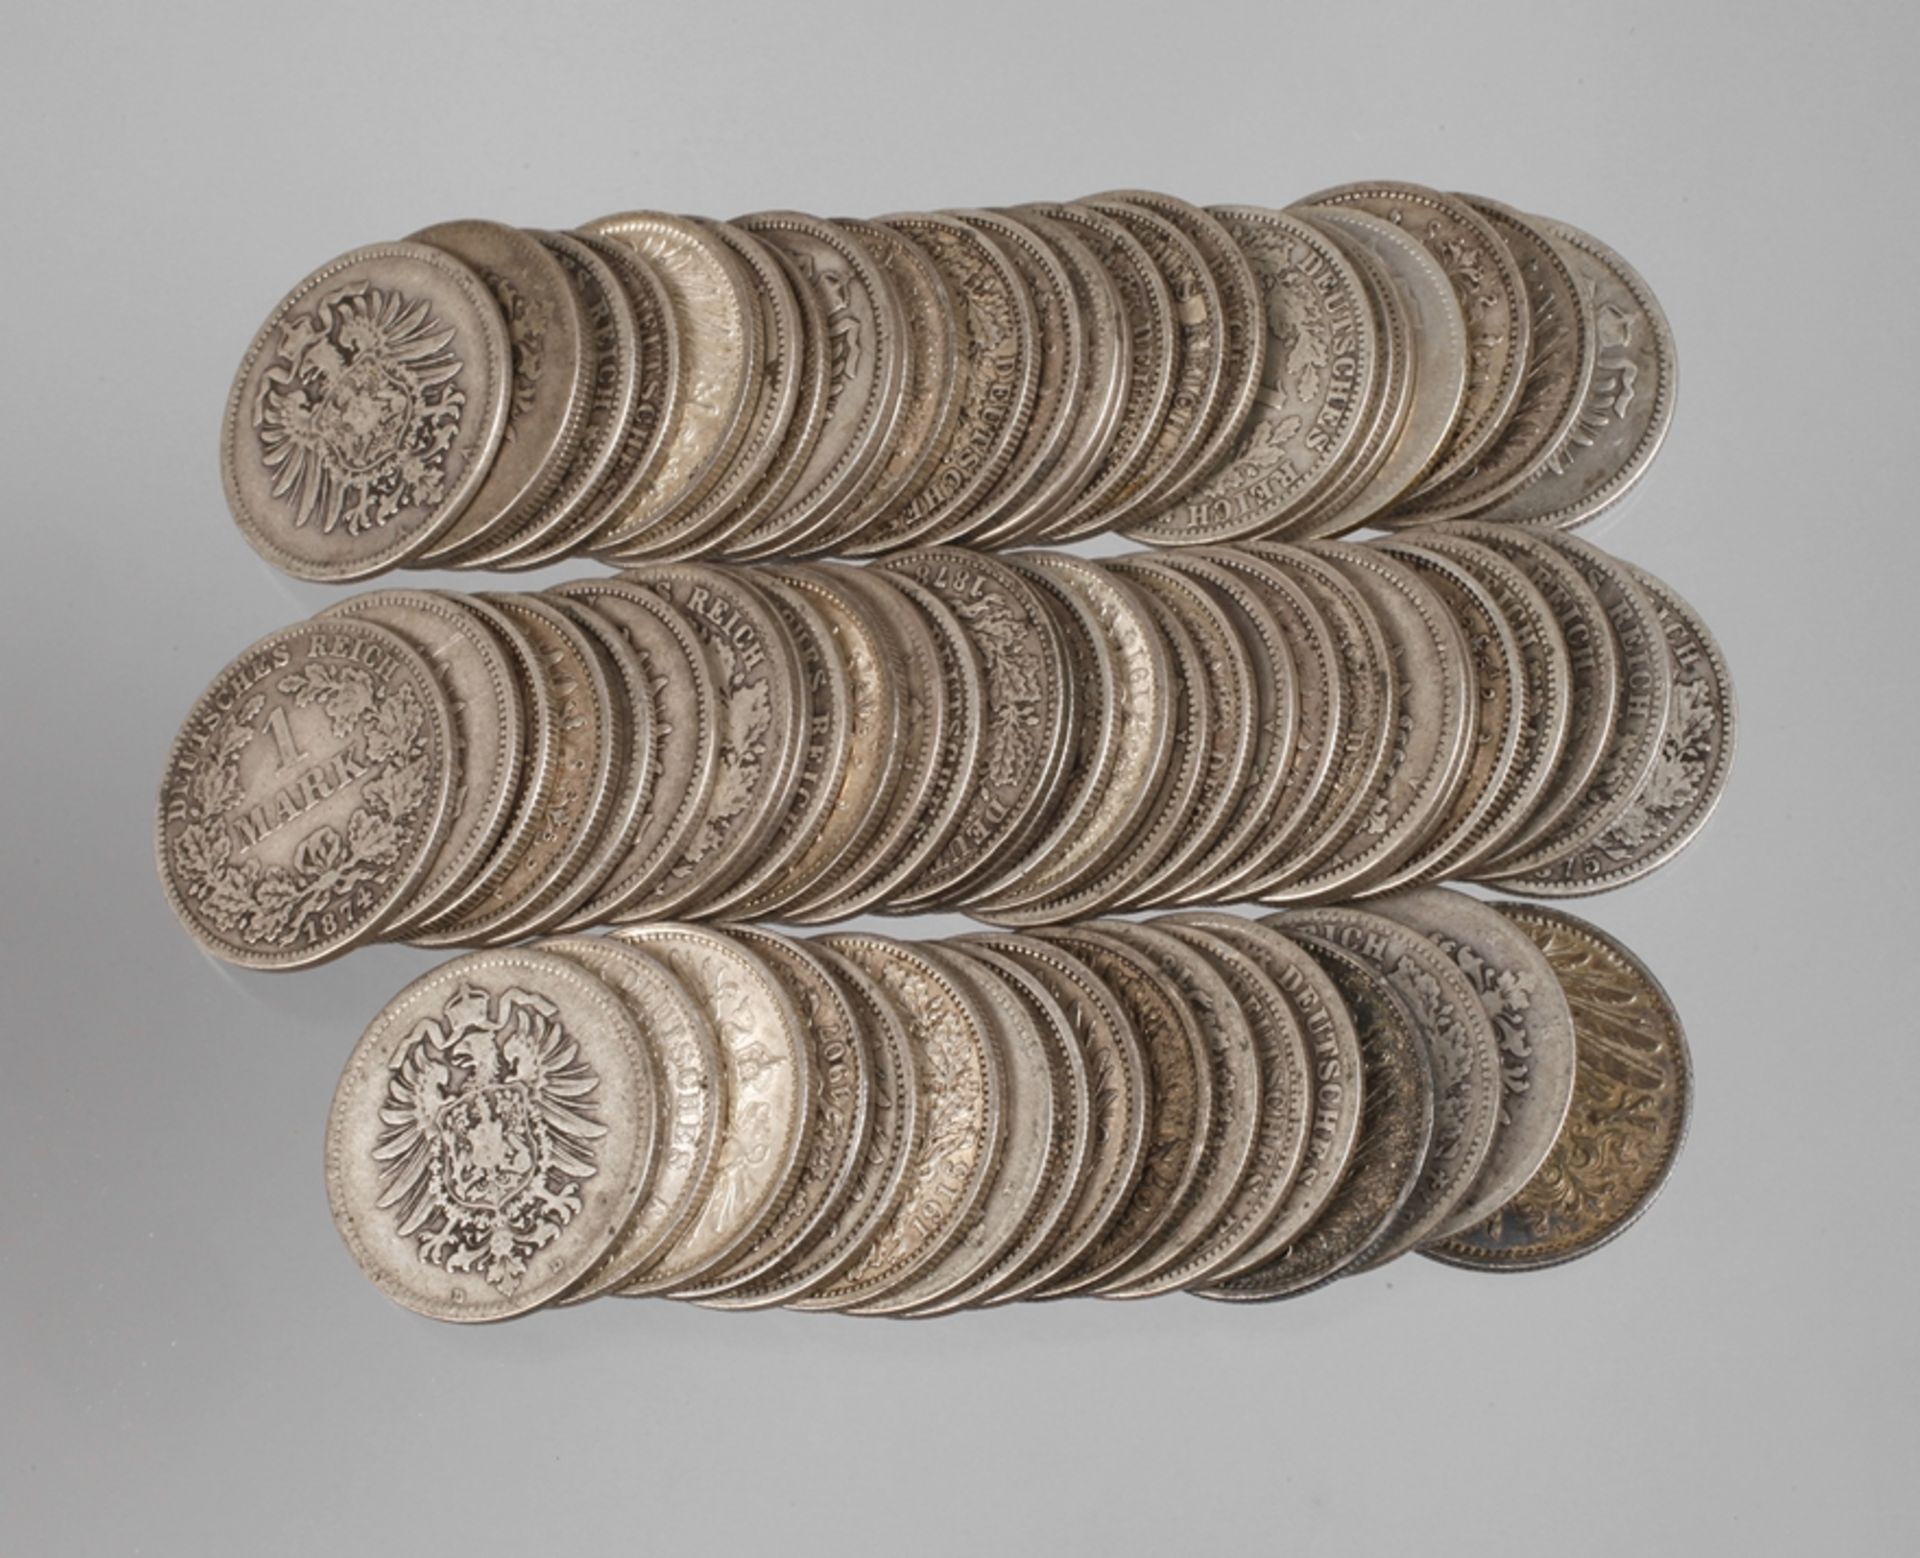 Convolute of silver coins of the German Empire